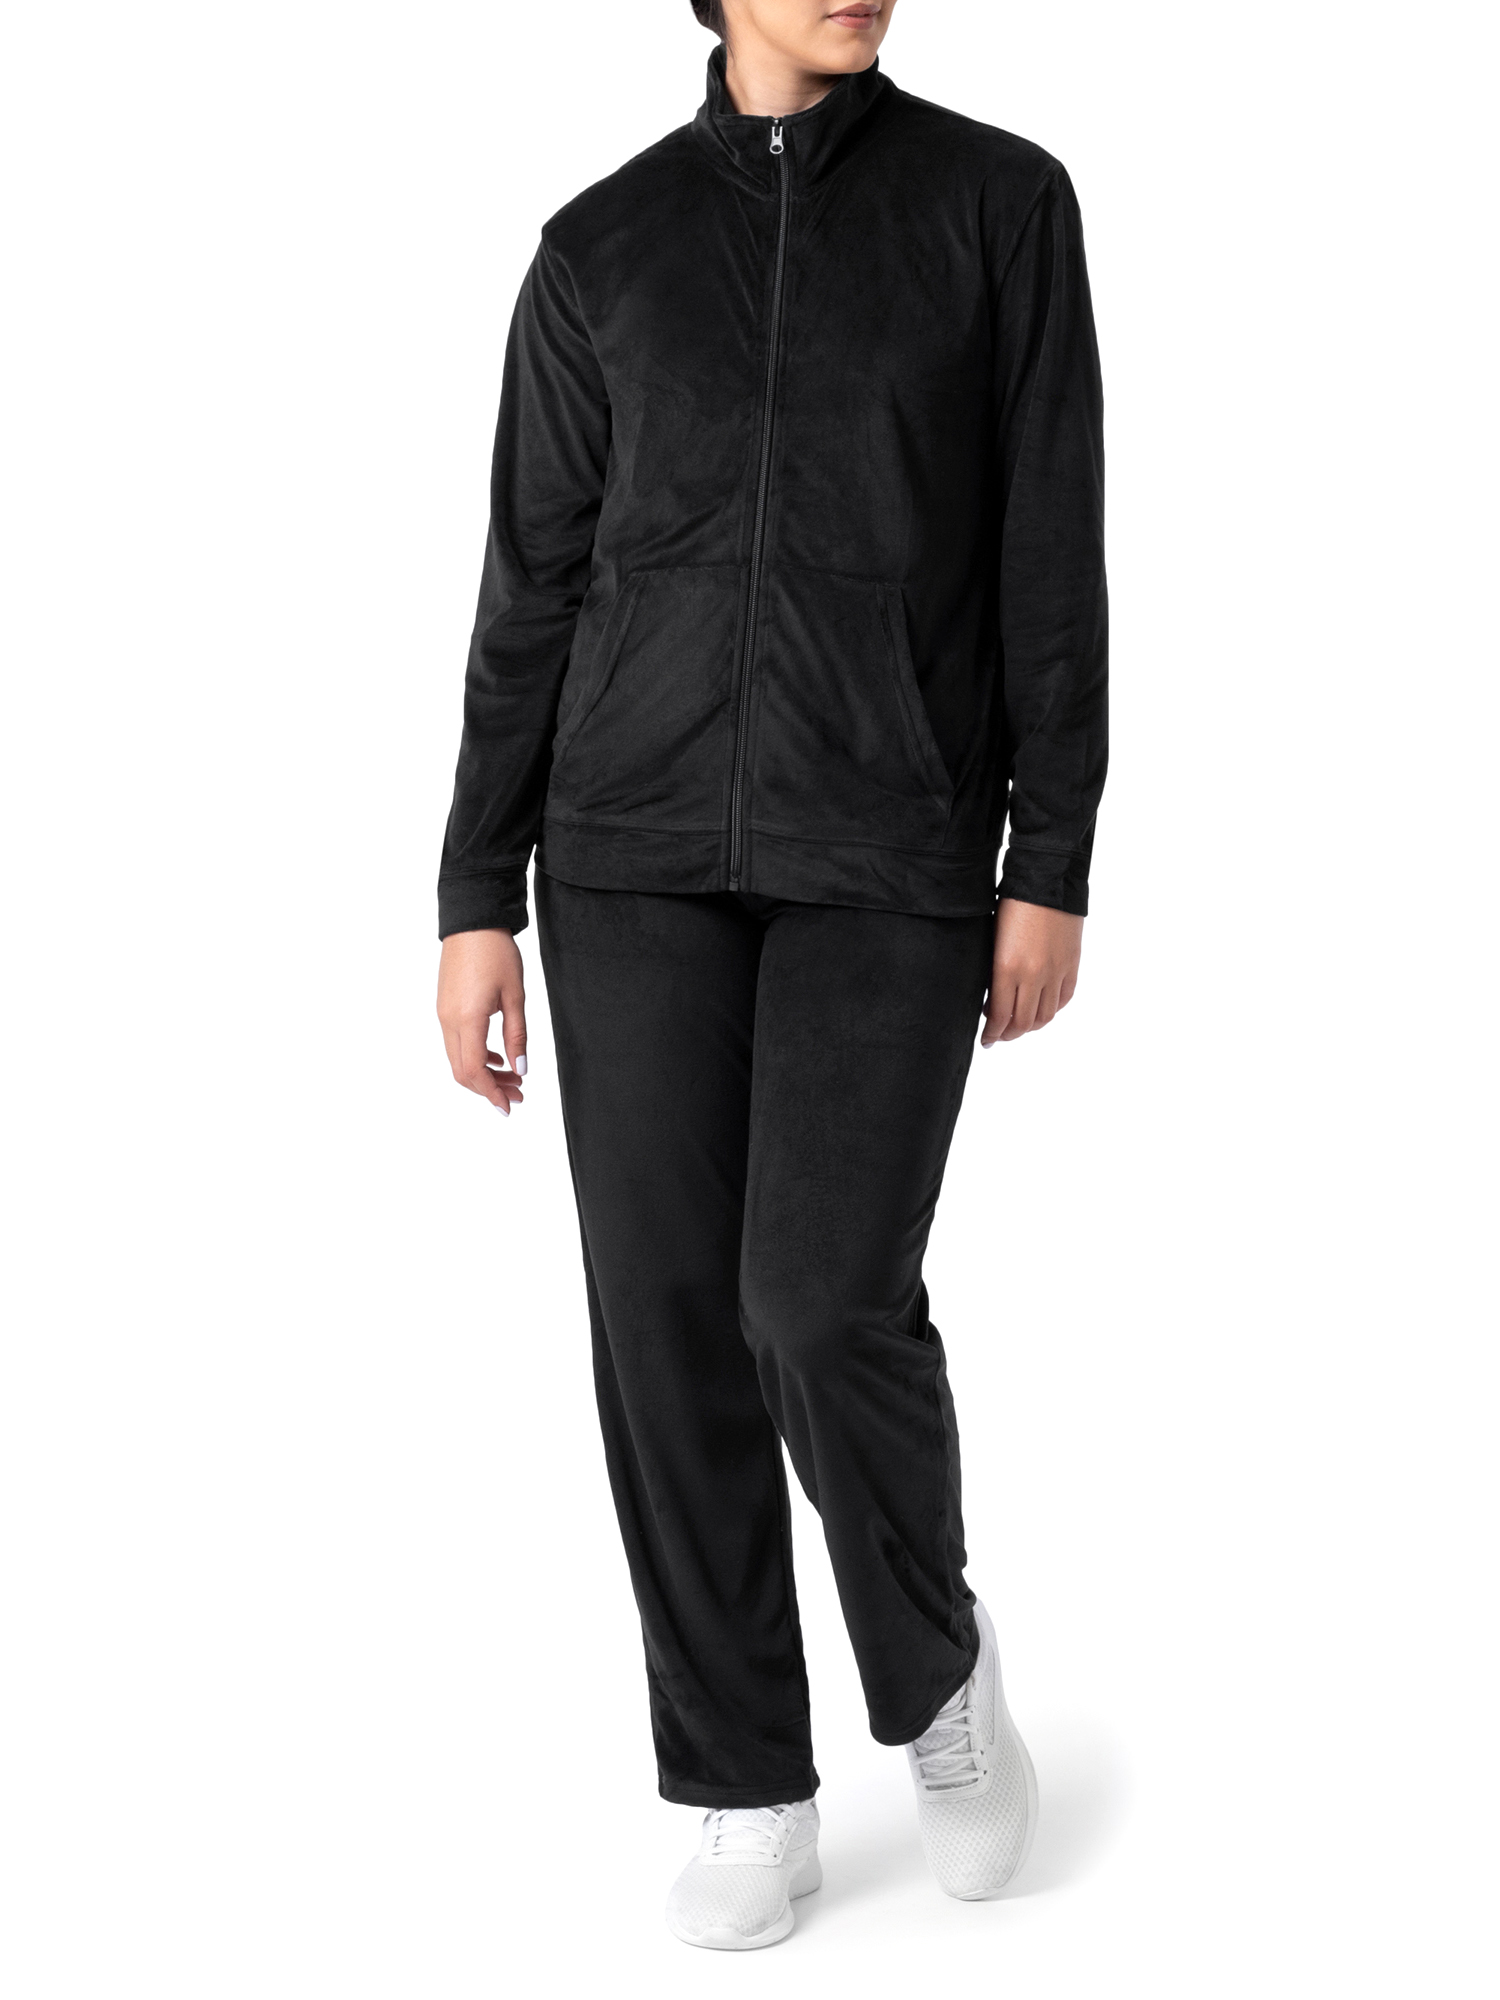 Athletic Works Women's Active Velour Zip-Up Track Jacket and Pants, 2-Piece Set - image 1 of 6